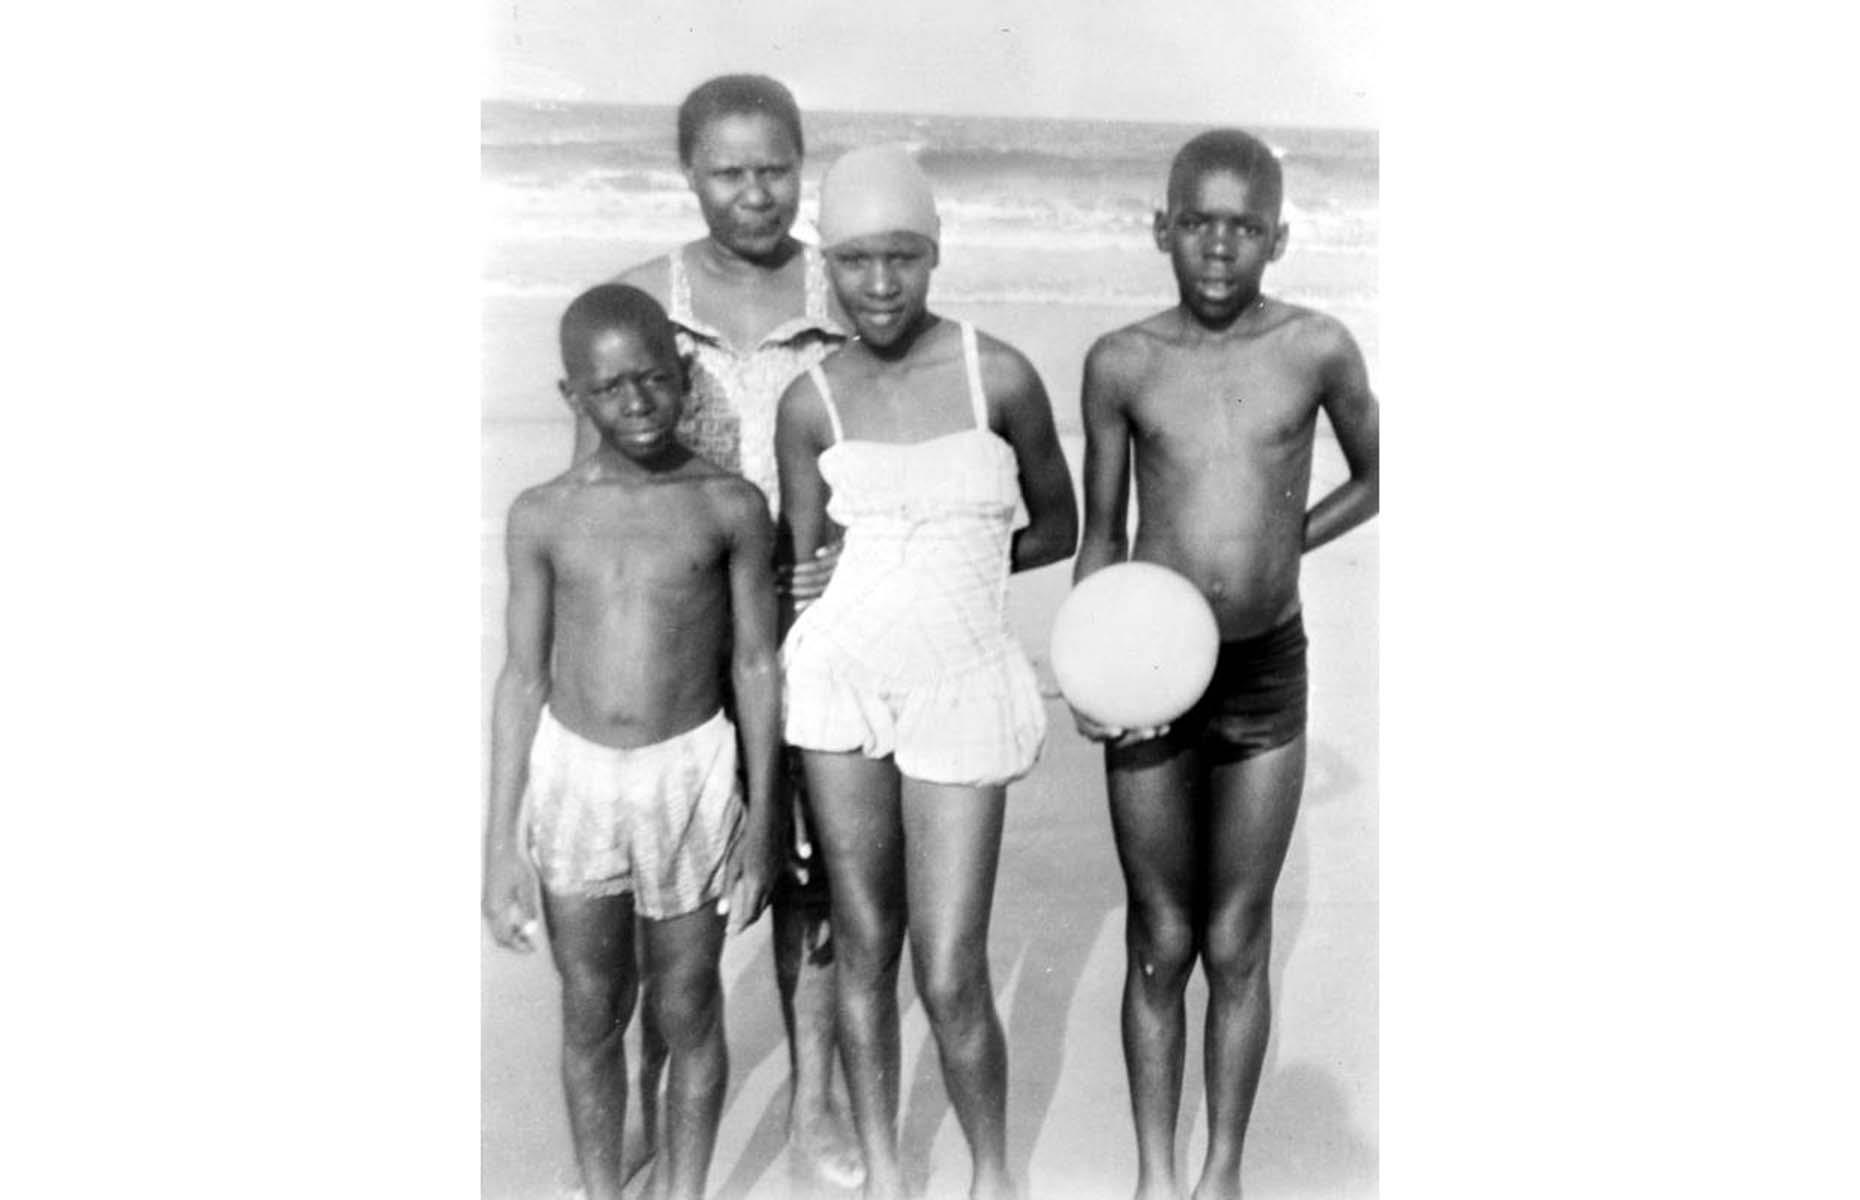 <p>Up until the mid-1960s, racial segregation affected most parts of life – even a simple family activity like going to the beach. As most areas in and around Jacksonville didn't welcome Black vacationers, several beaches for minorities popped up, most notably, American Beach on Amelia Island. The largest and most popular beach community among African Americans, American Beach Historic District is now listed on the National Register of Historic Places. Here, a family is photographed on American Beach in 1958.</p>